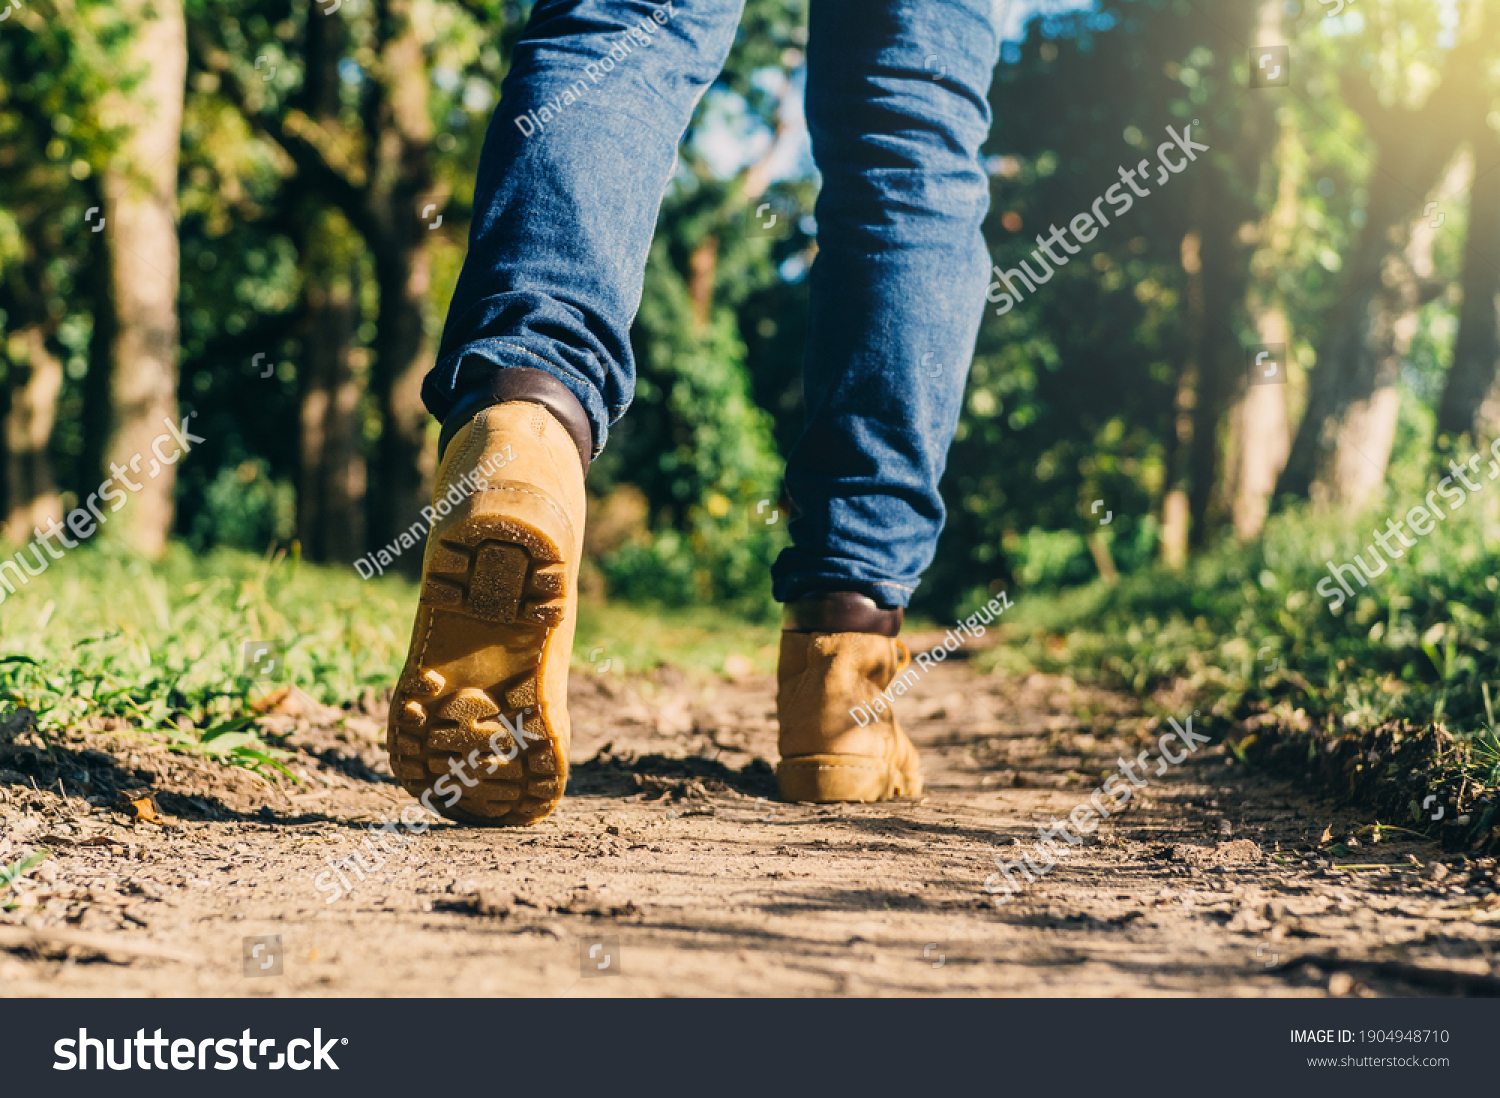 feet of an adult wearing boots to travel walking in a green forest. travel and hiking concept. #1904948710